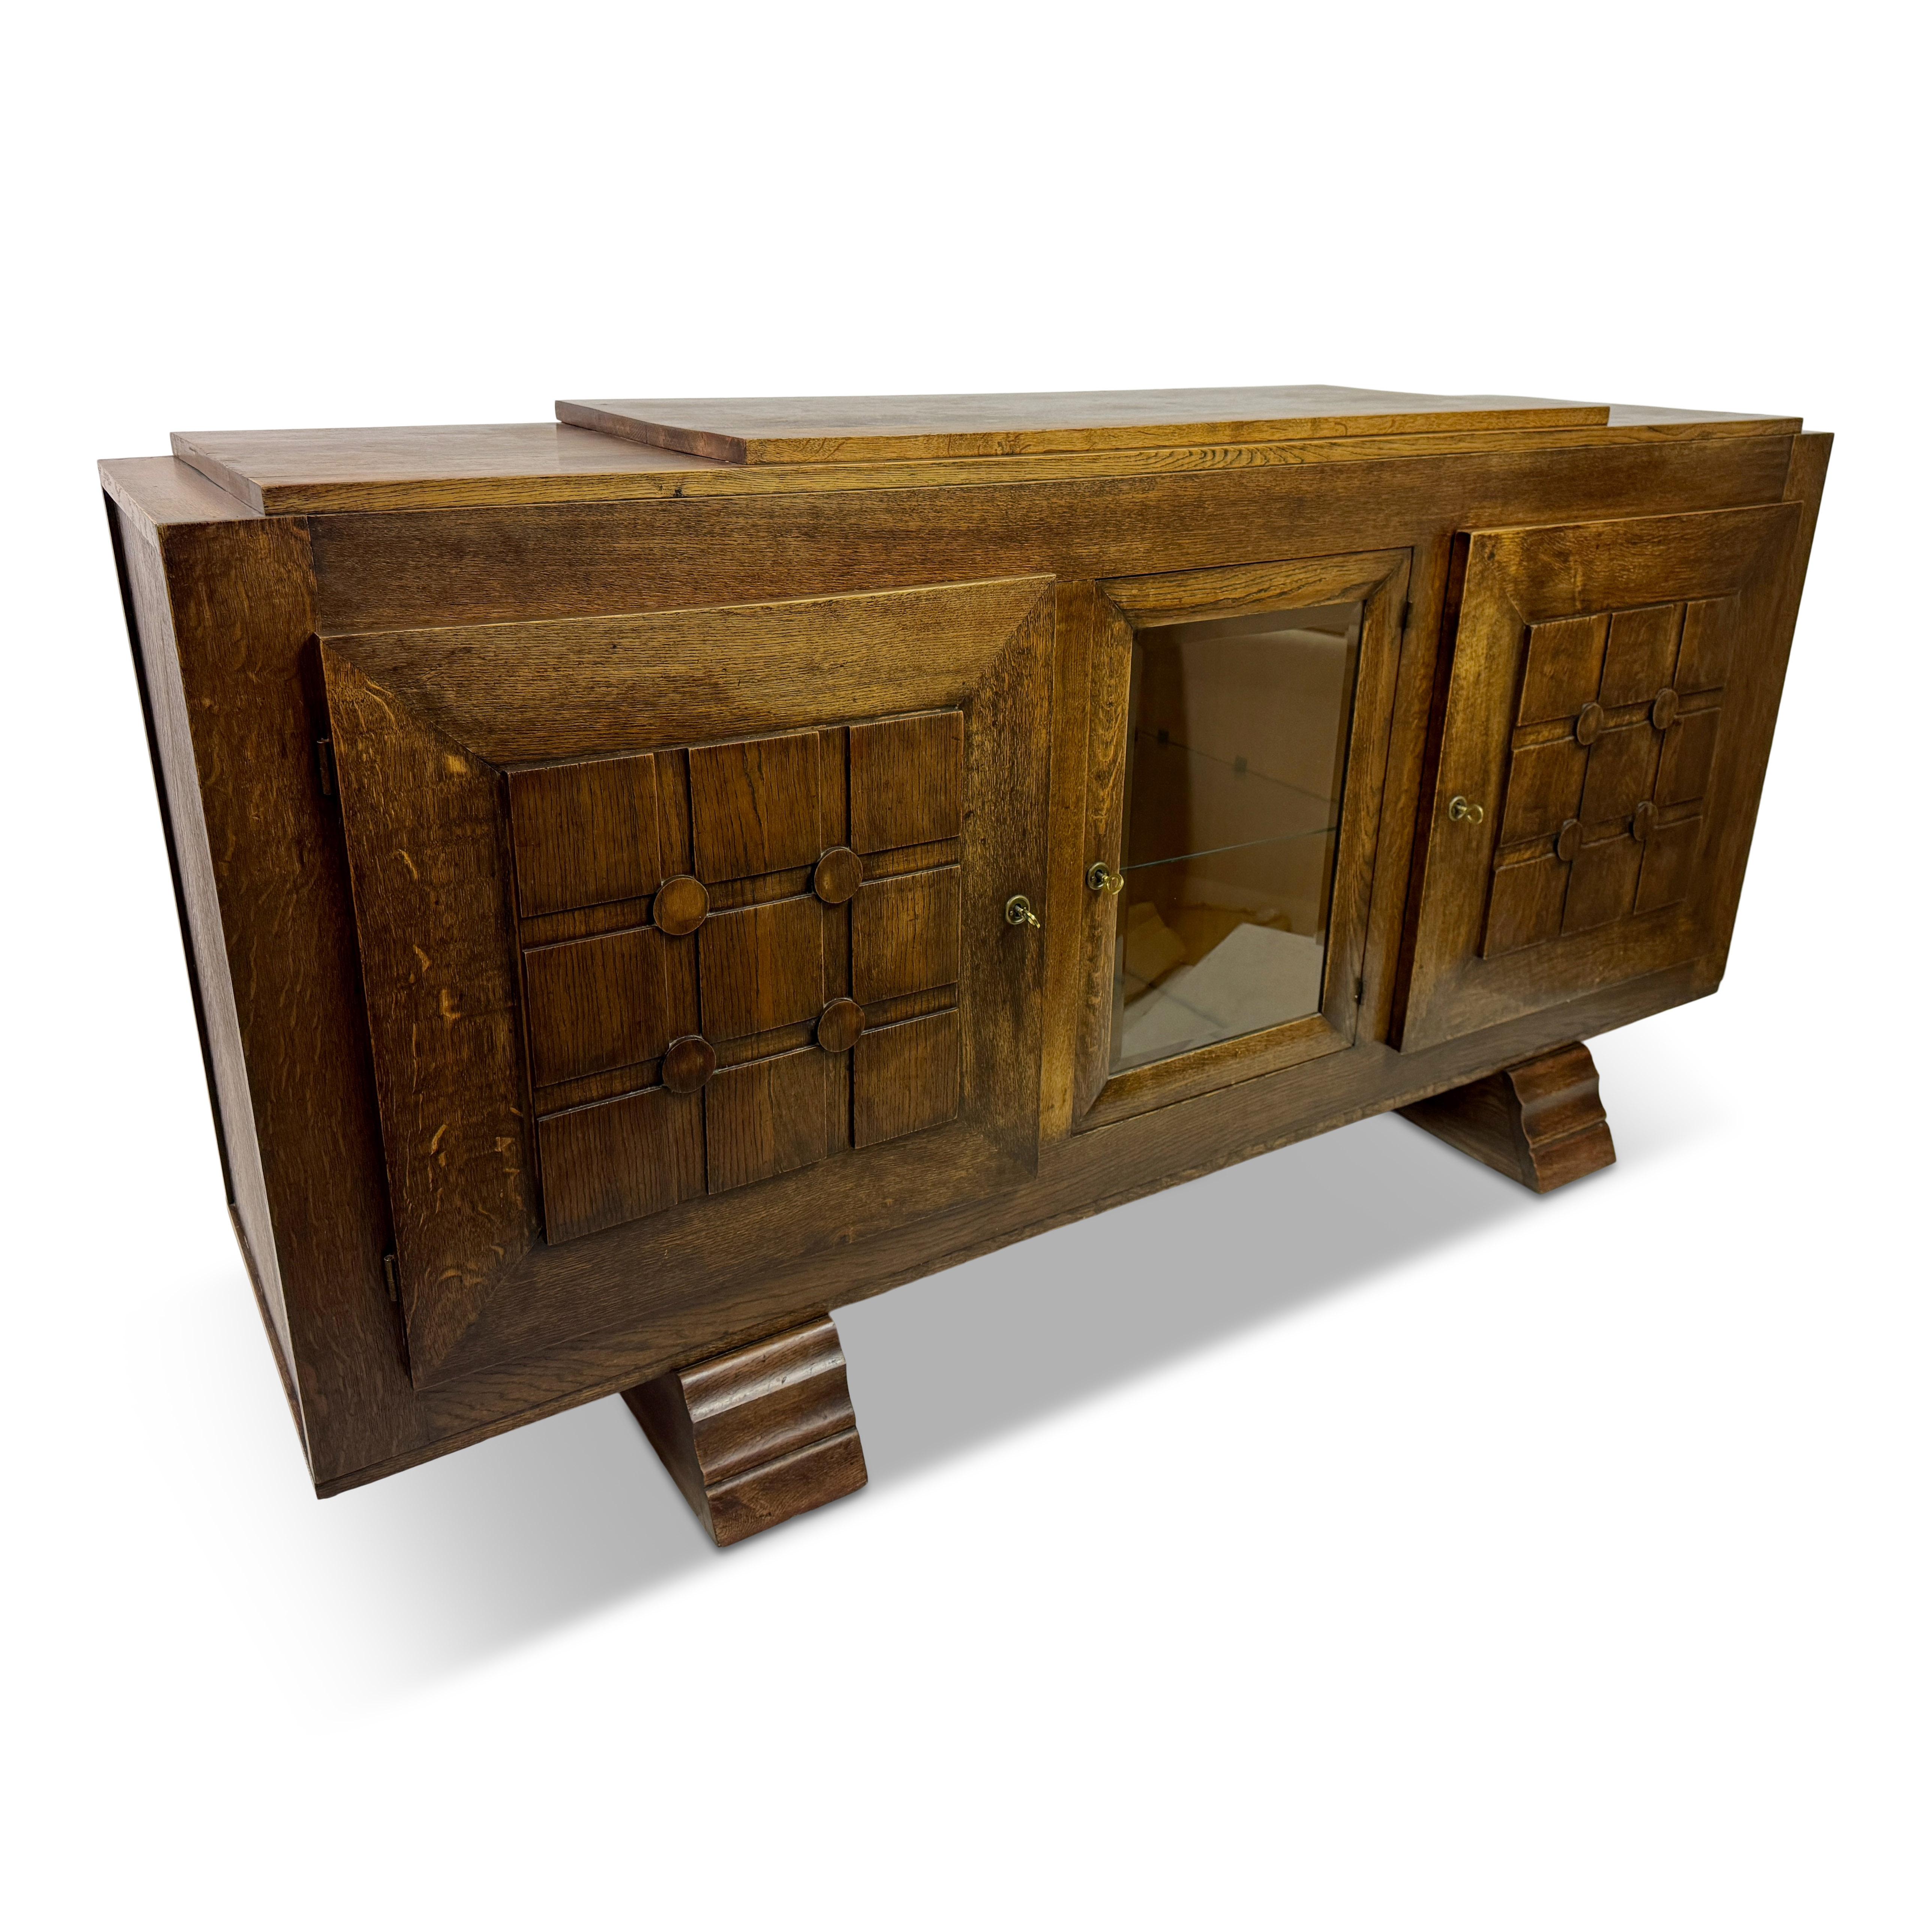 Sideboard or credenza

Oak

By Gaston Poisson

Graphic door fronts

Shelves and drawers inside

France 1930s/1940s